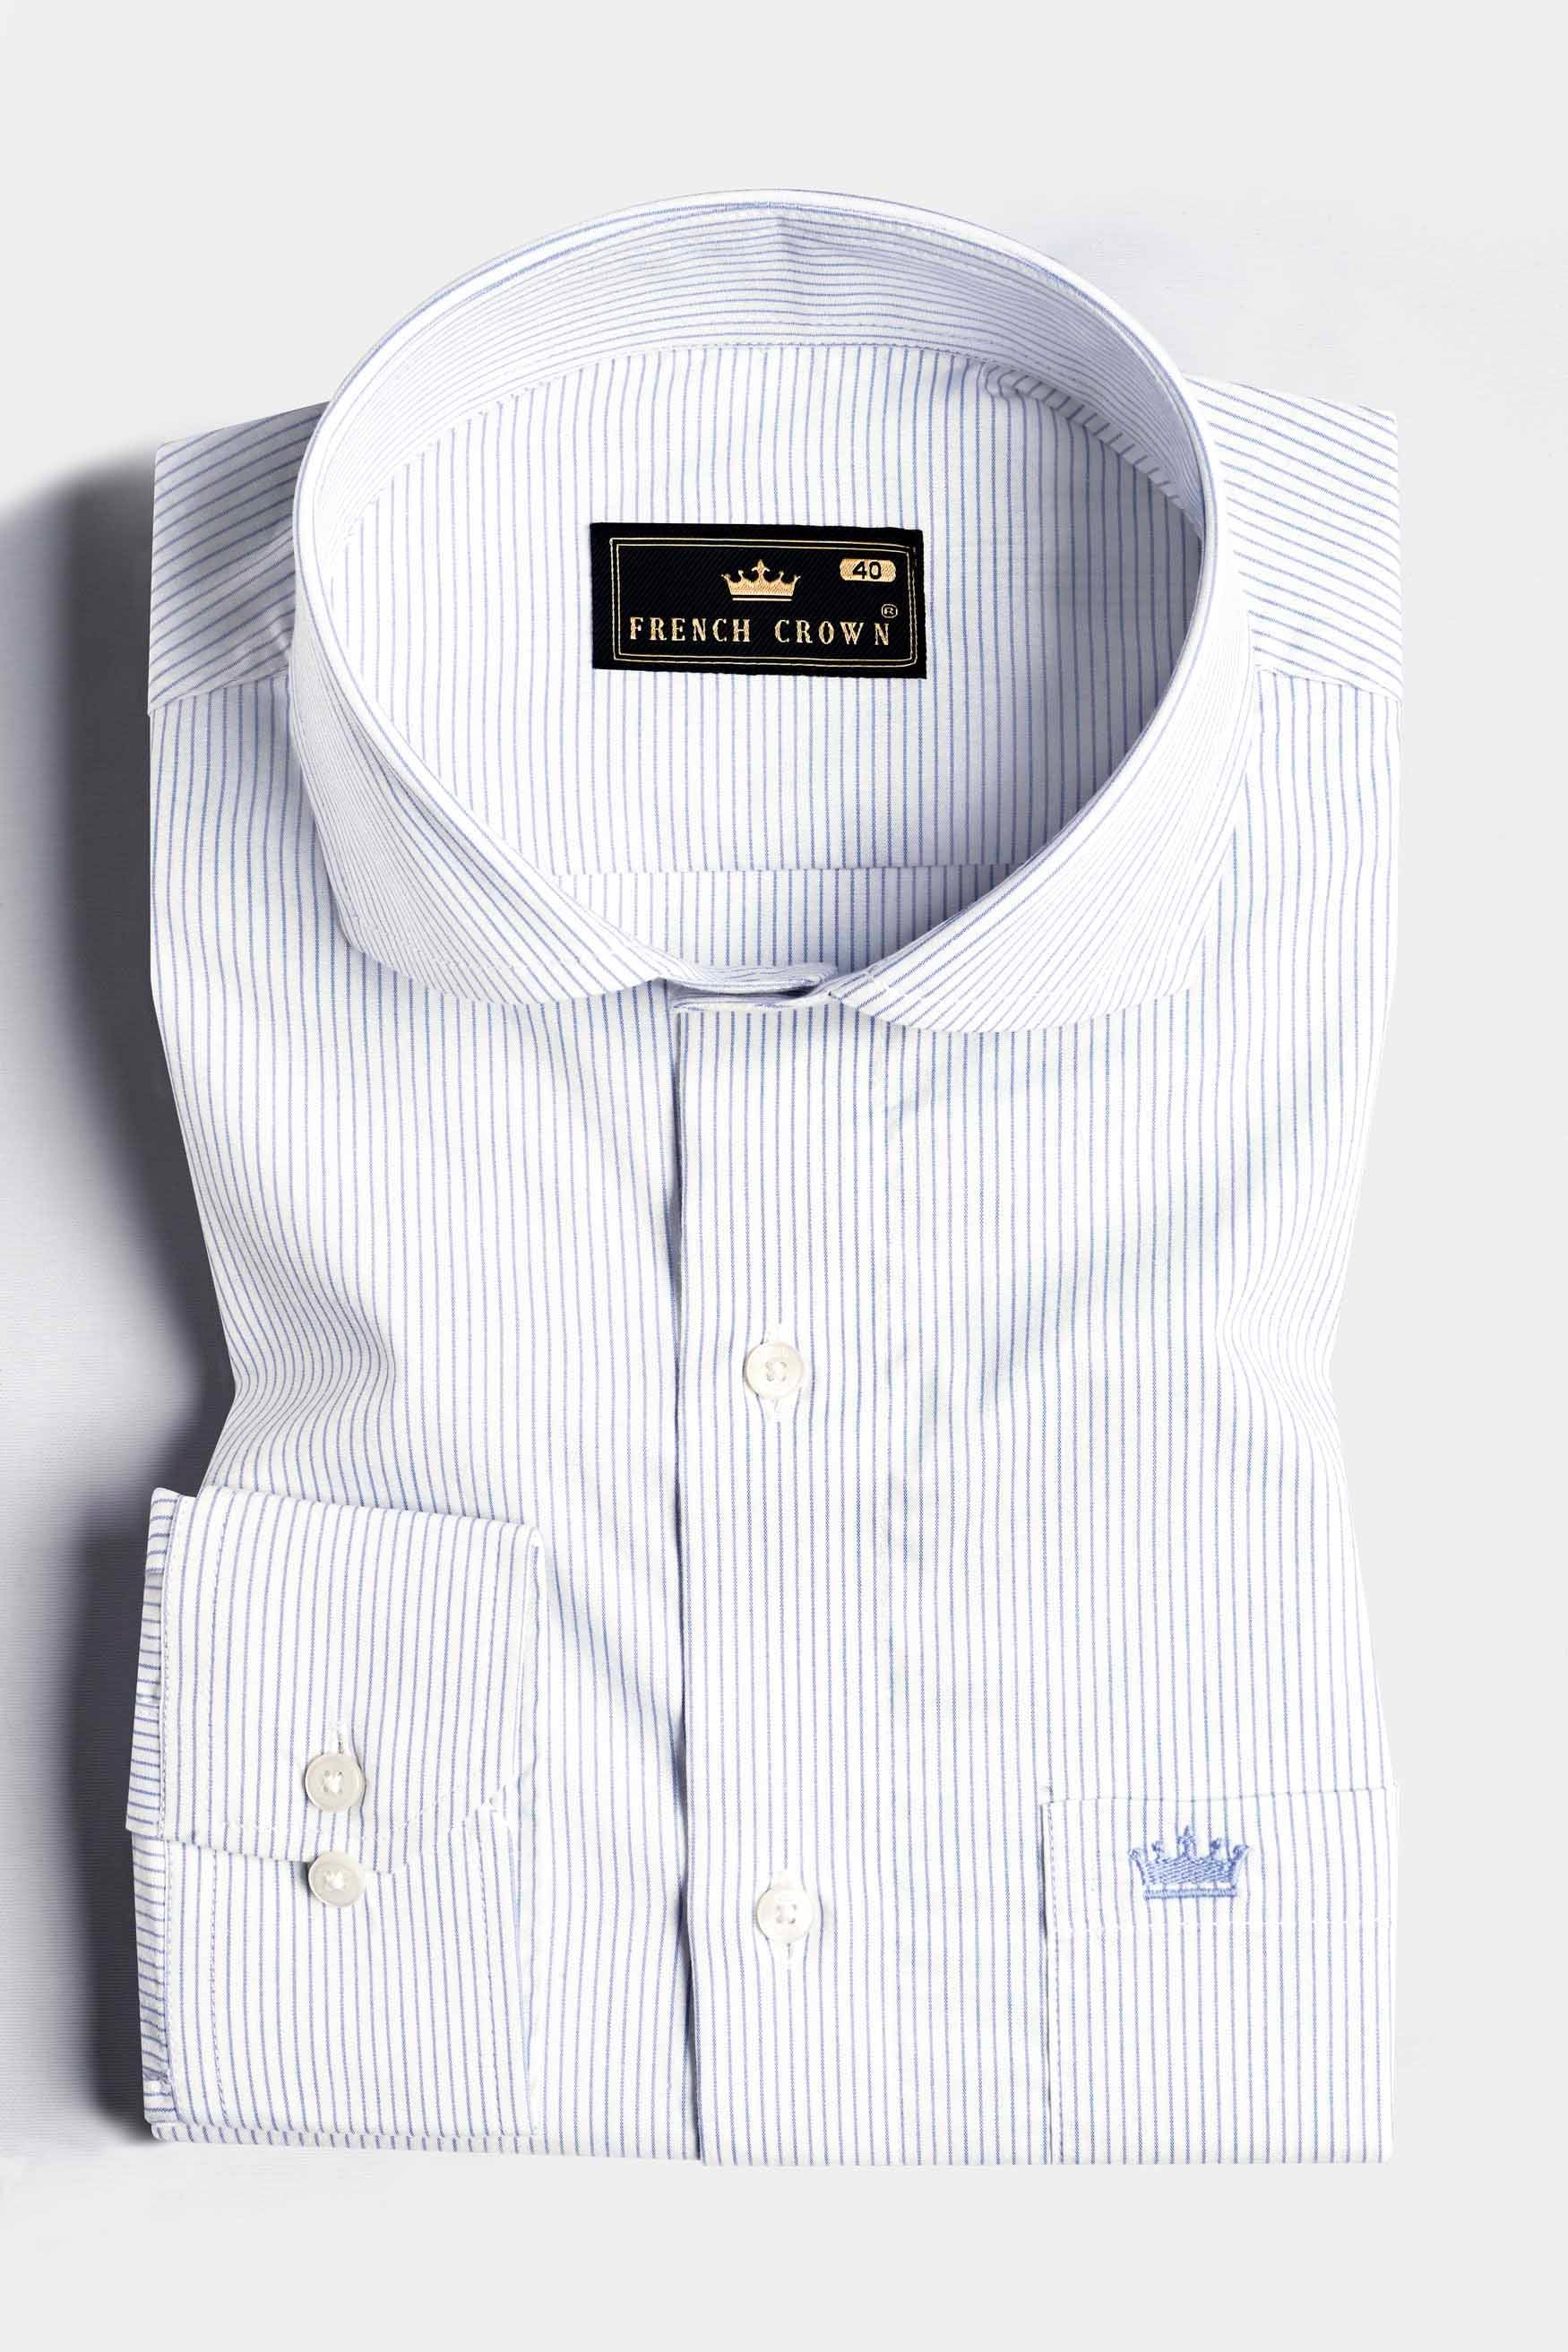 Bright White and Yonder Blue Pin Striped Premium Cotton Shirt 11572-CA-38, 11572-CA-H-38, 11572-CA-39, 11572-CA-H-39, 11572-CA-40, 11572-CA-H-40, 11572-CA-42, 11572-CA-H-42, 11572-CA-44, 11572-CA-H-44, 11572-CA-46, 11572-CA-H-46, 11572-CA-48, 11572-CA-H-48, 11572-CA-50, 11572-CA-H-50, 11572-CA-52, 11572-CA-H-52